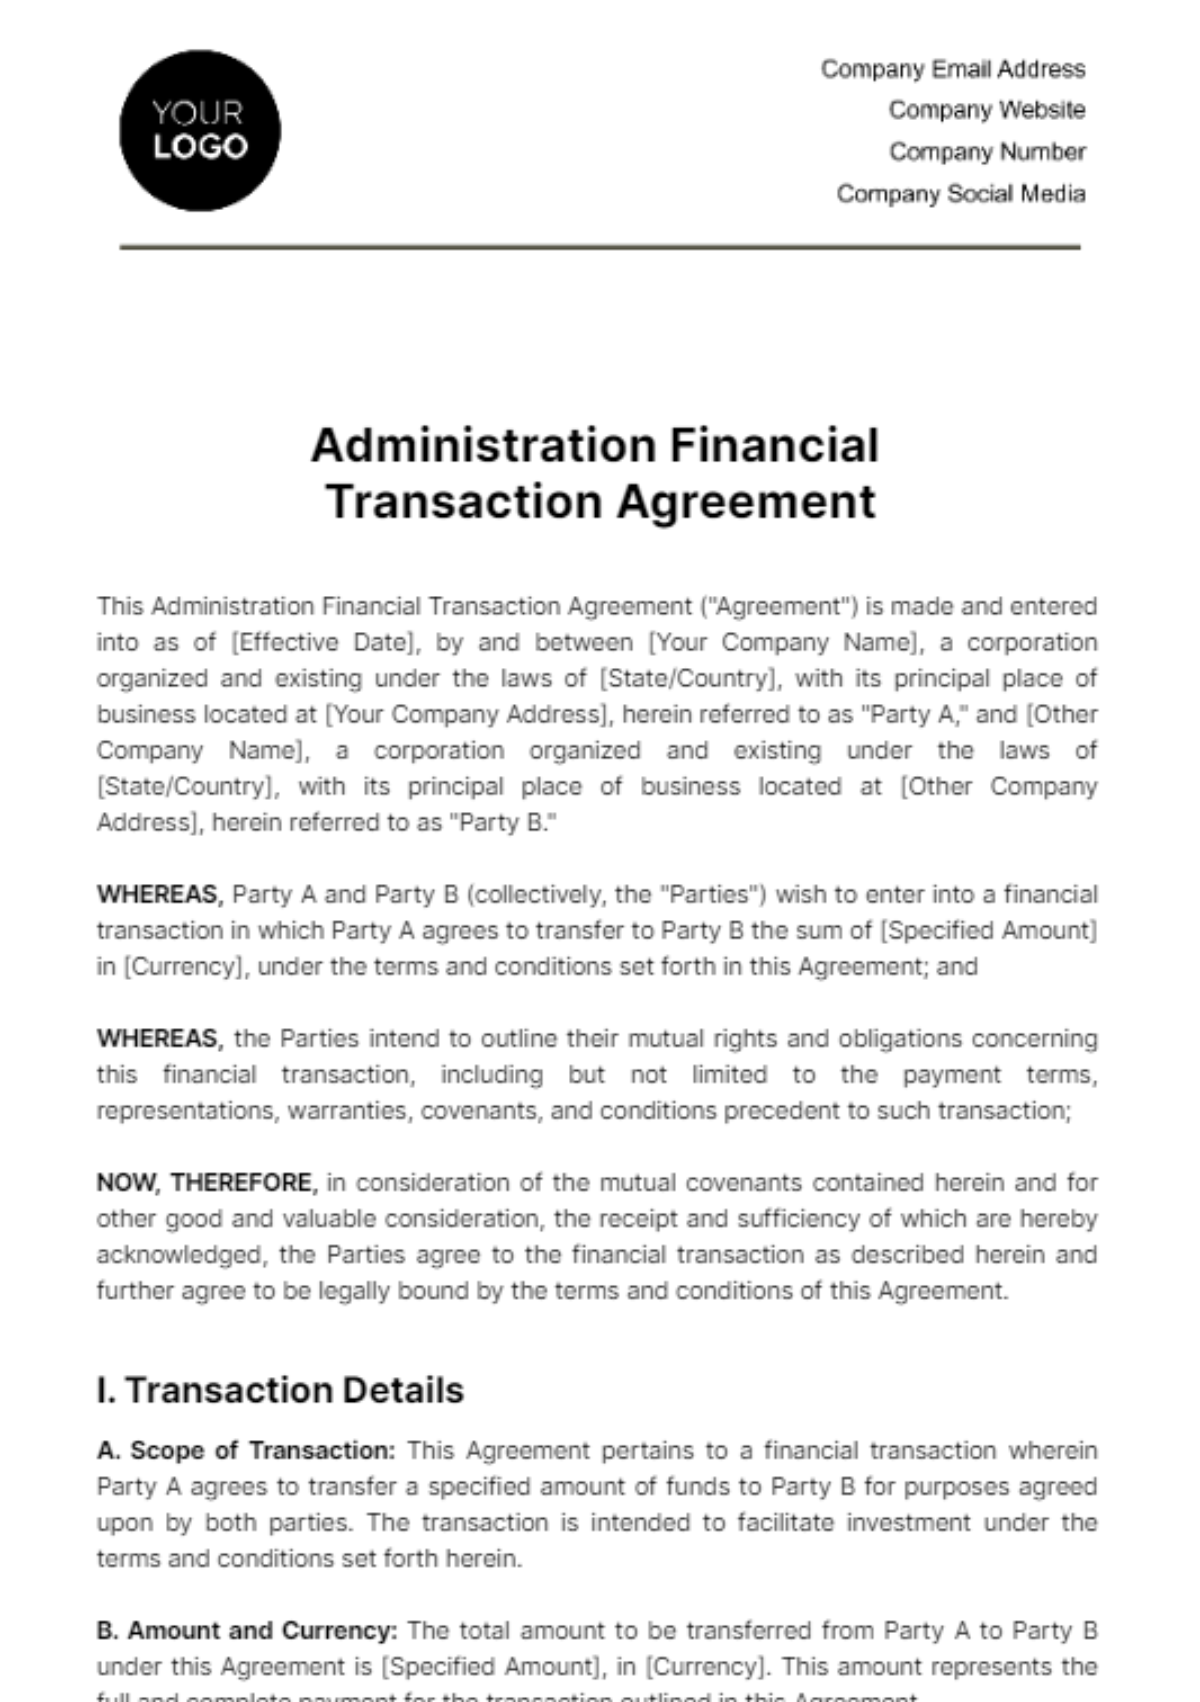 Administration Financial Transaction Agreement Template